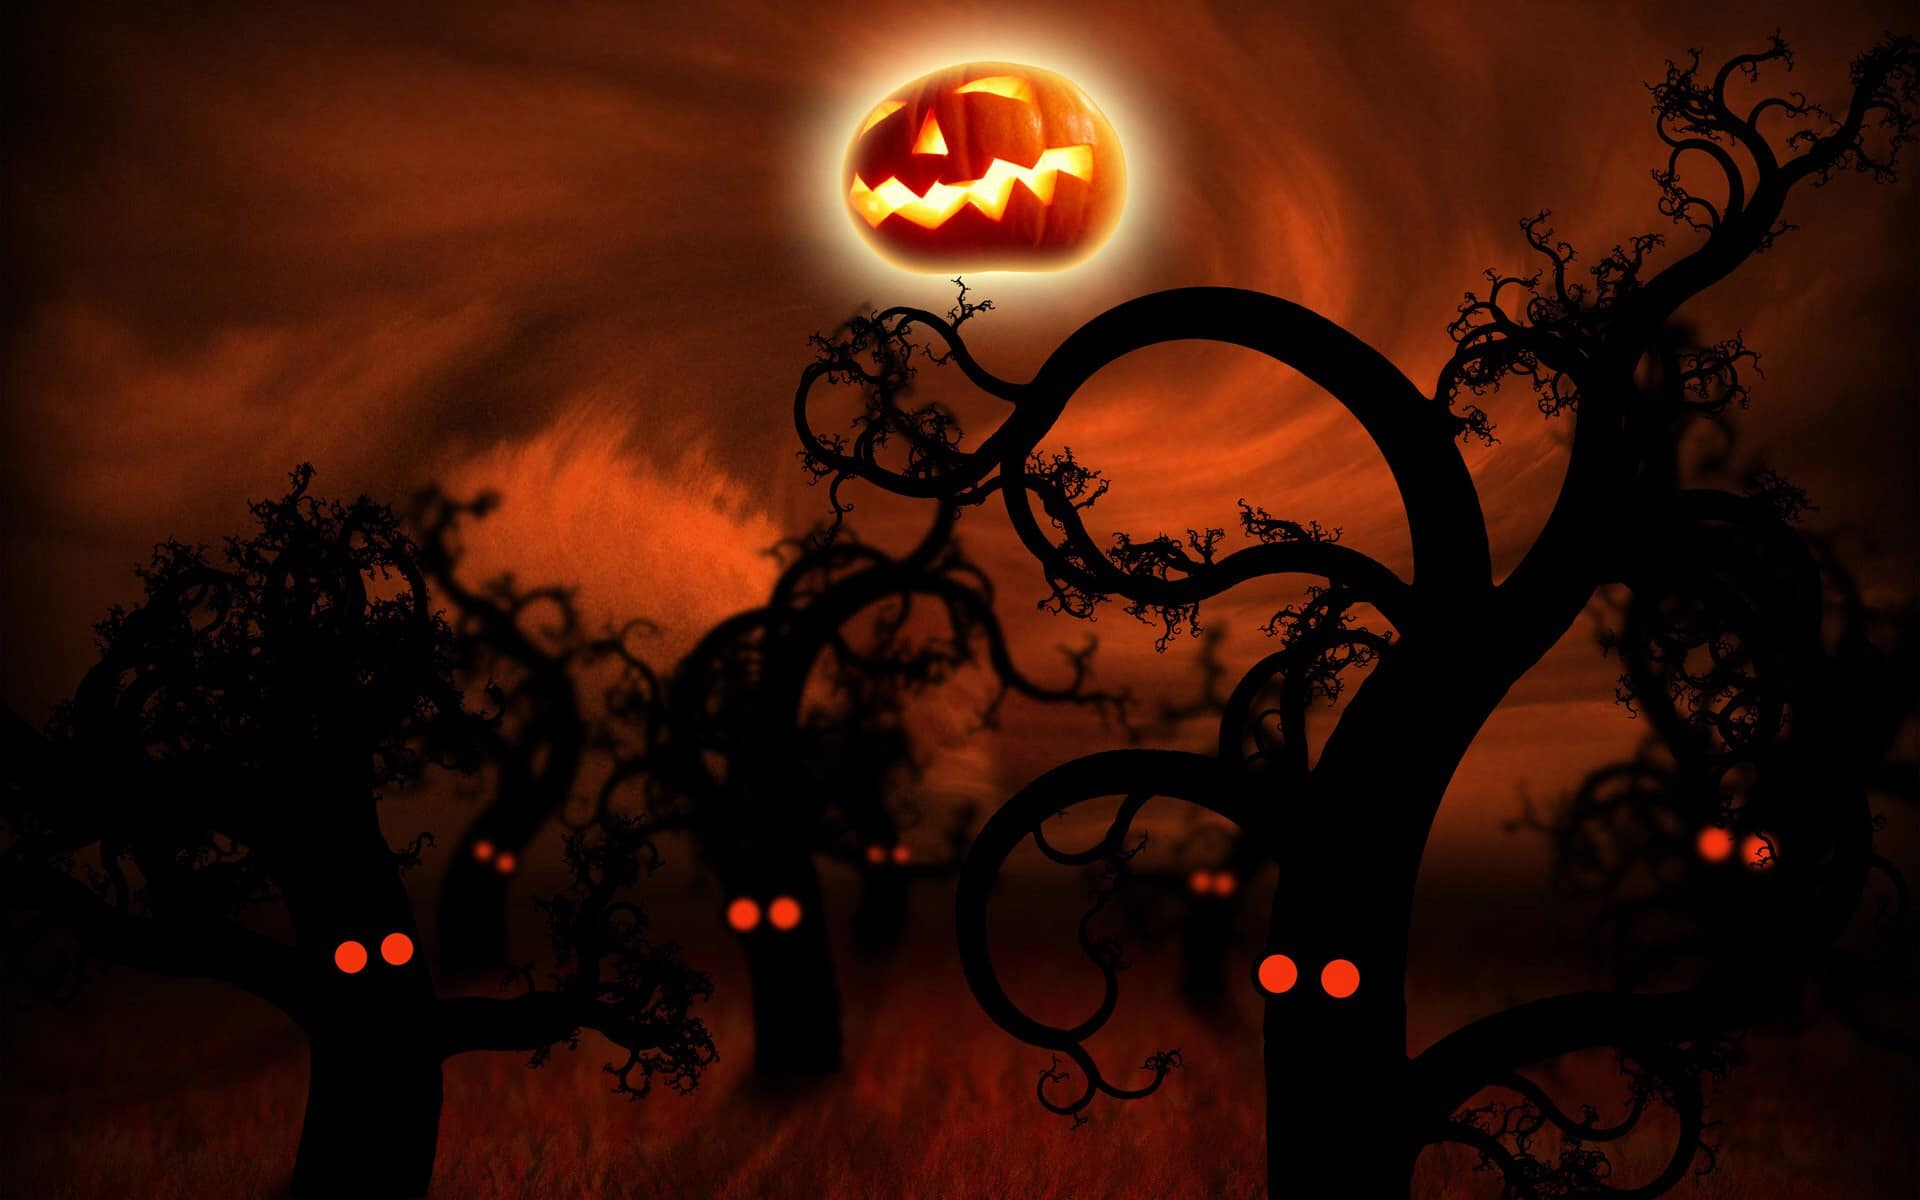 Free Halloween Pictures to Download 